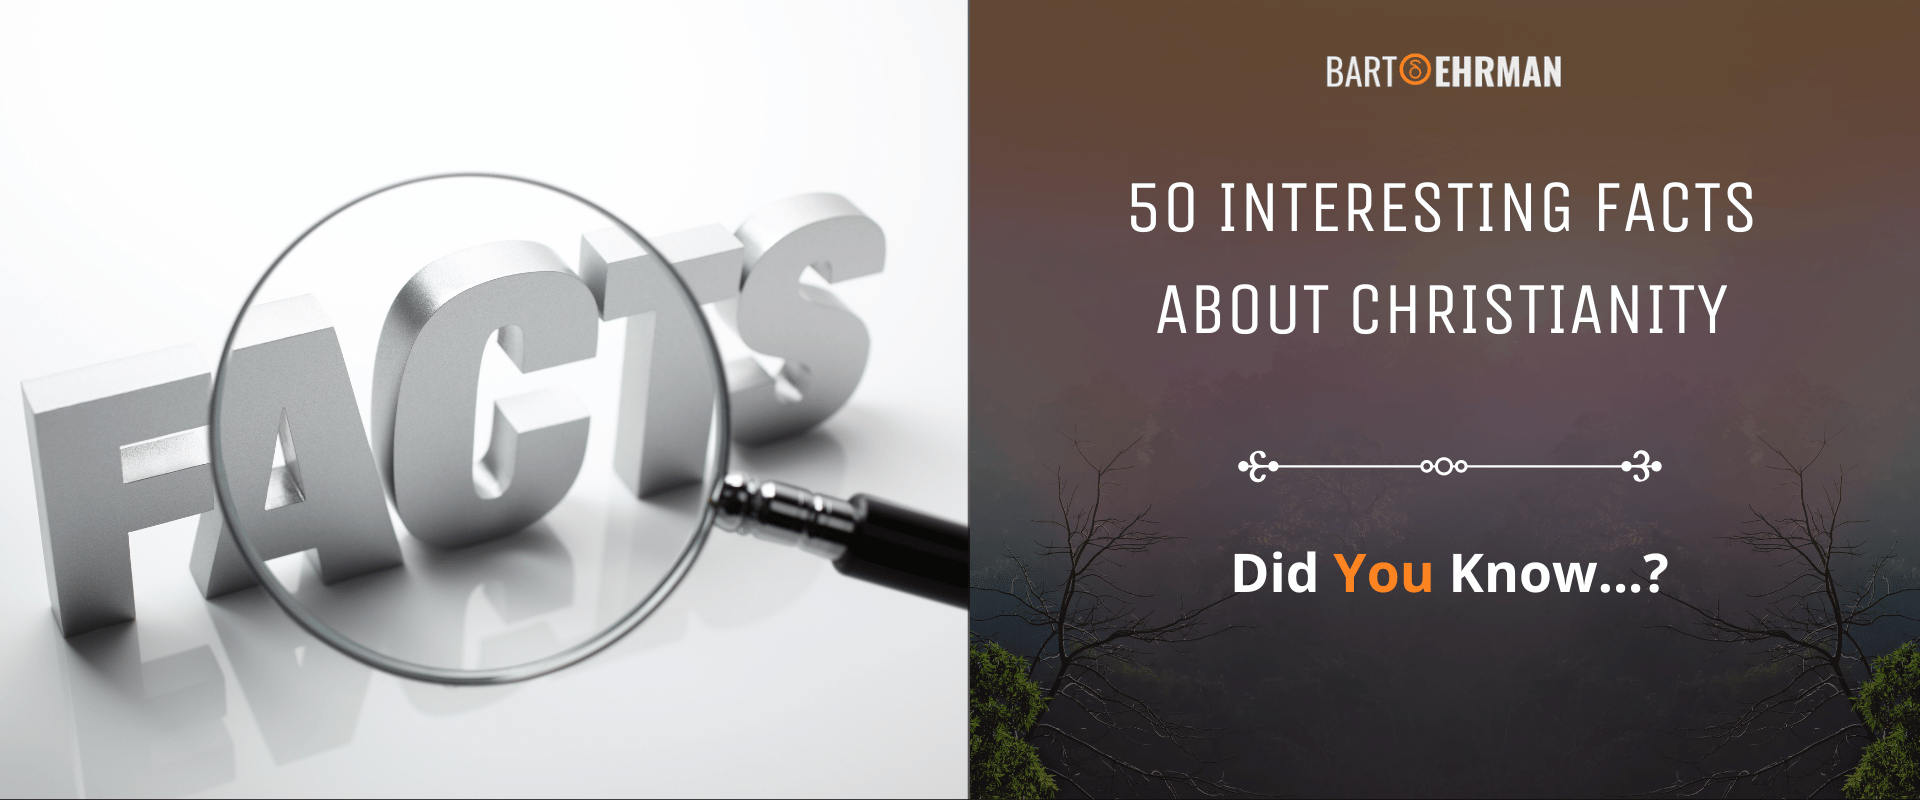 50 Interesting Facts about Christianity (That You Didn’t Know!)